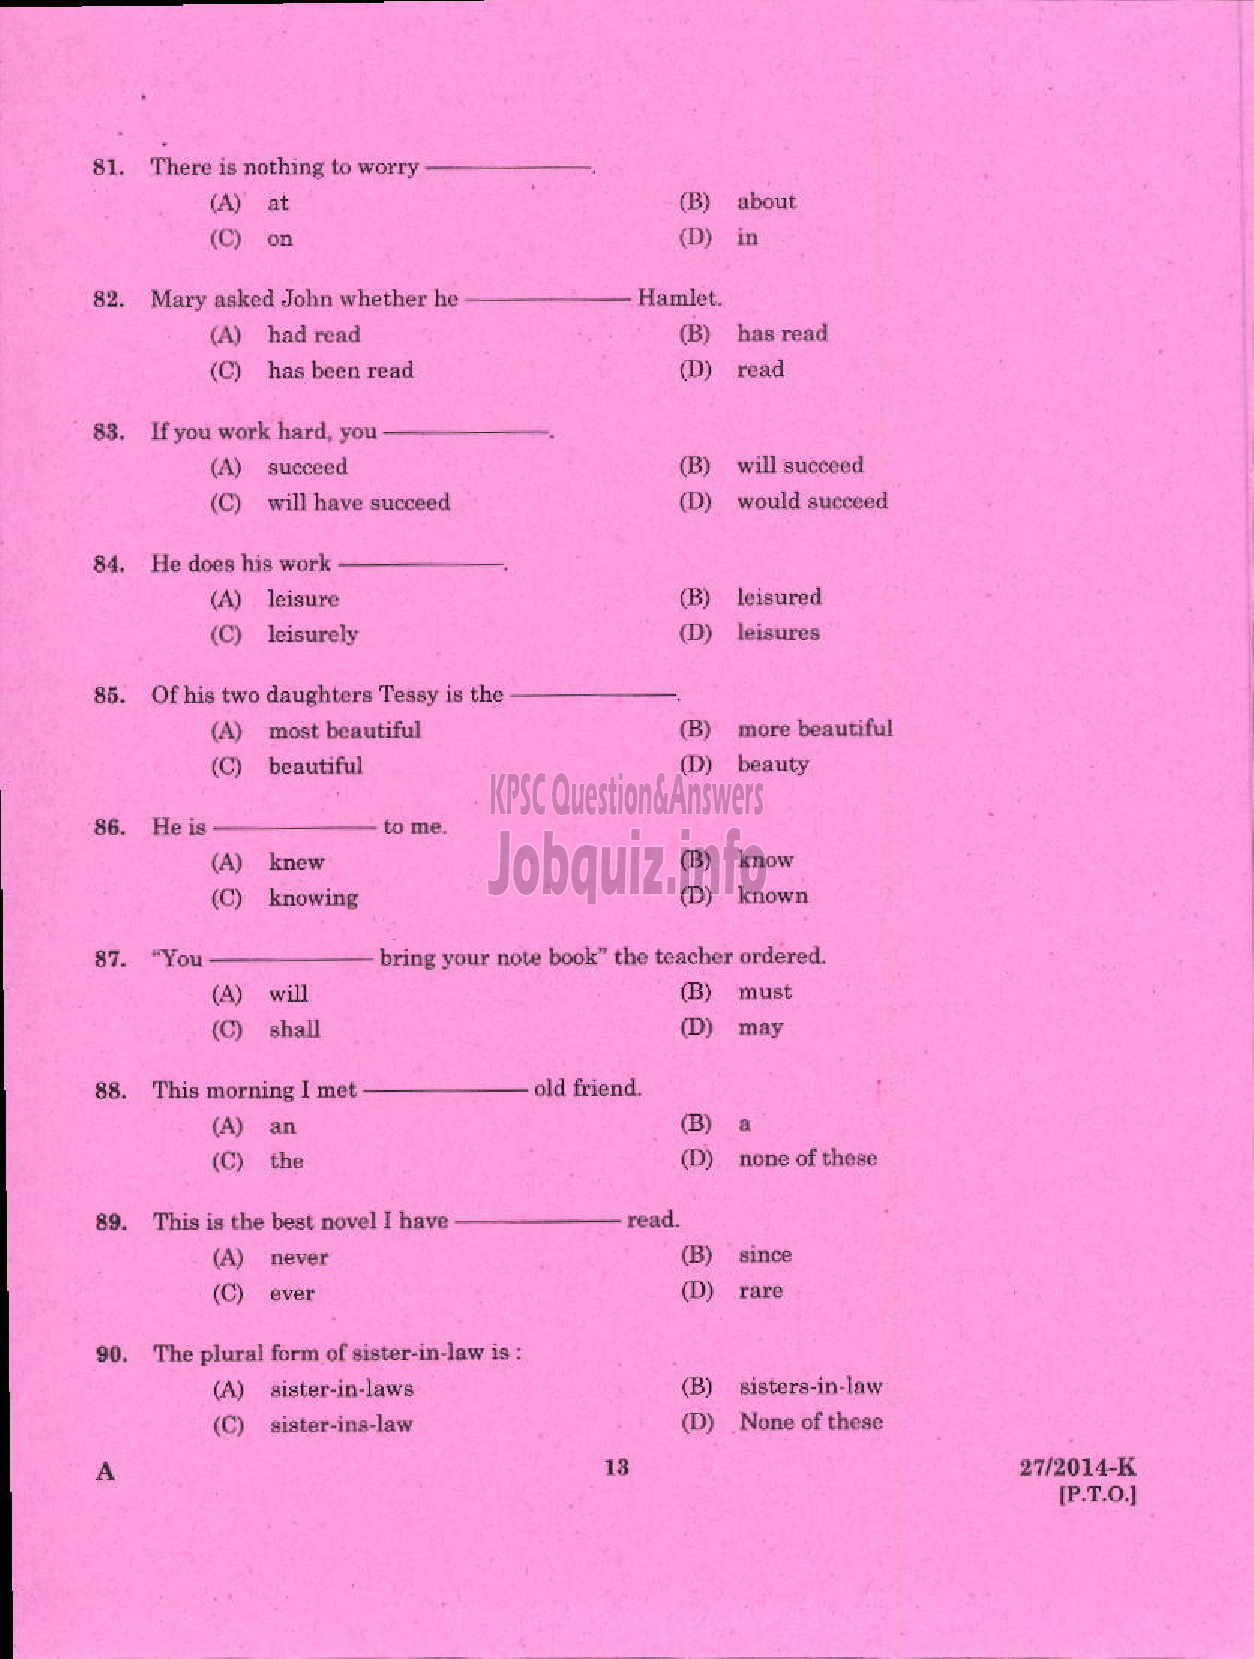 Kerala PSC Question Paper - LOWER DIVISION CLERK 2014 VARIOUS BY TRANSFER ( Kannada )-11